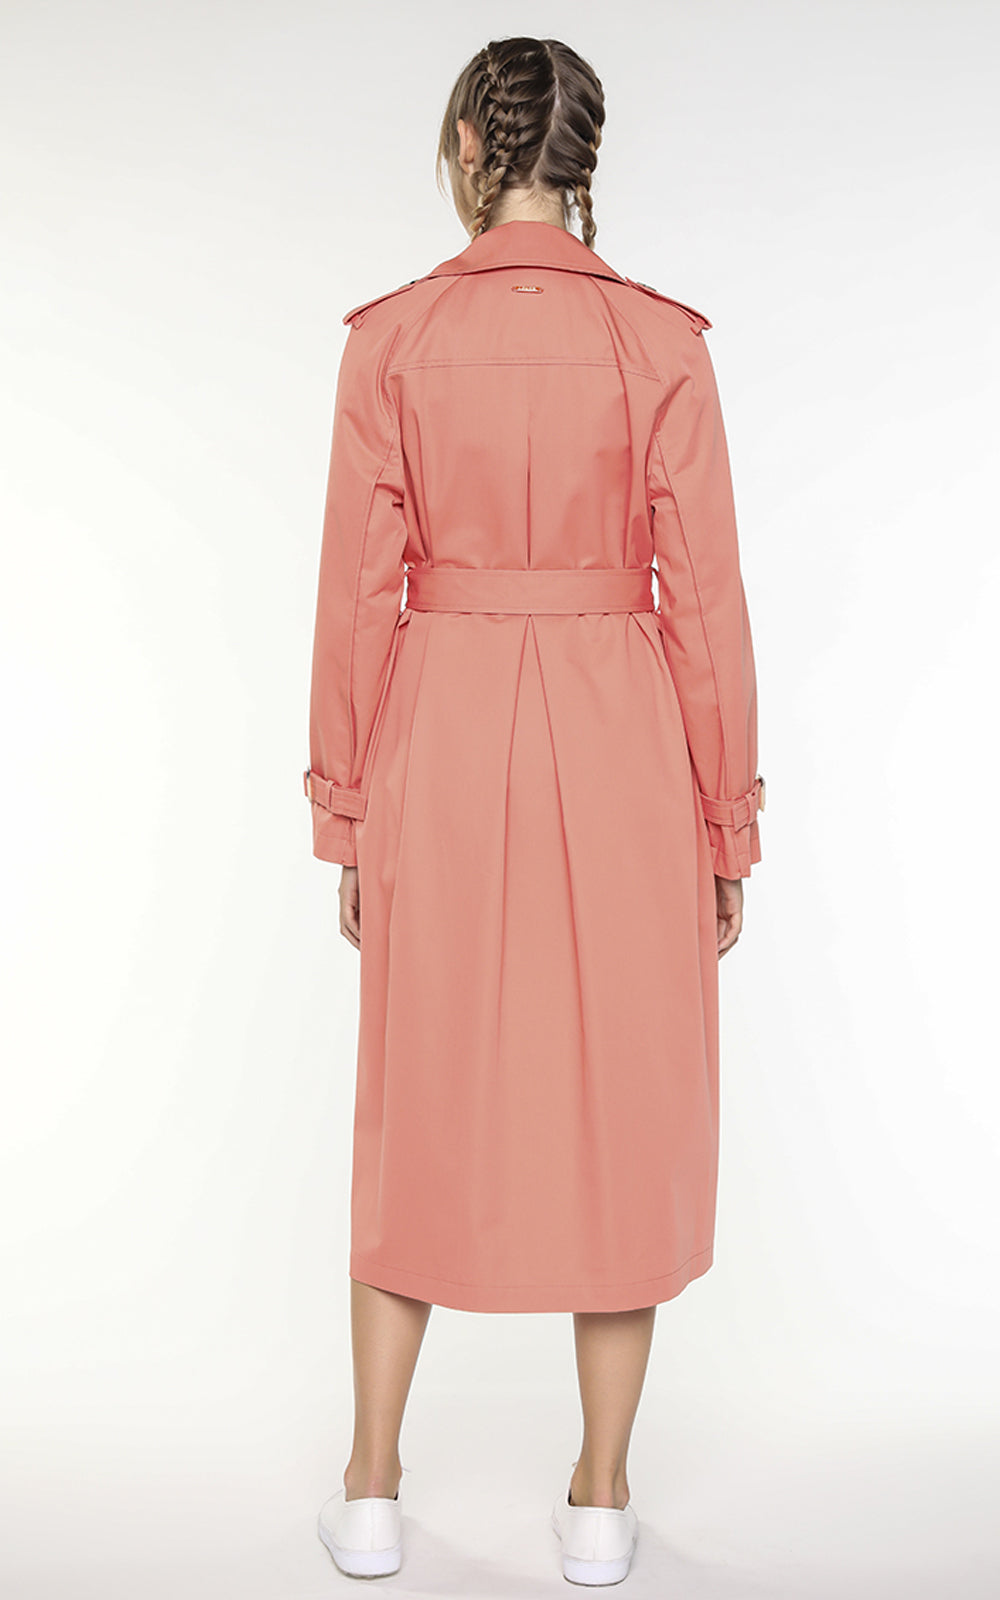 Imperméable rose style trench